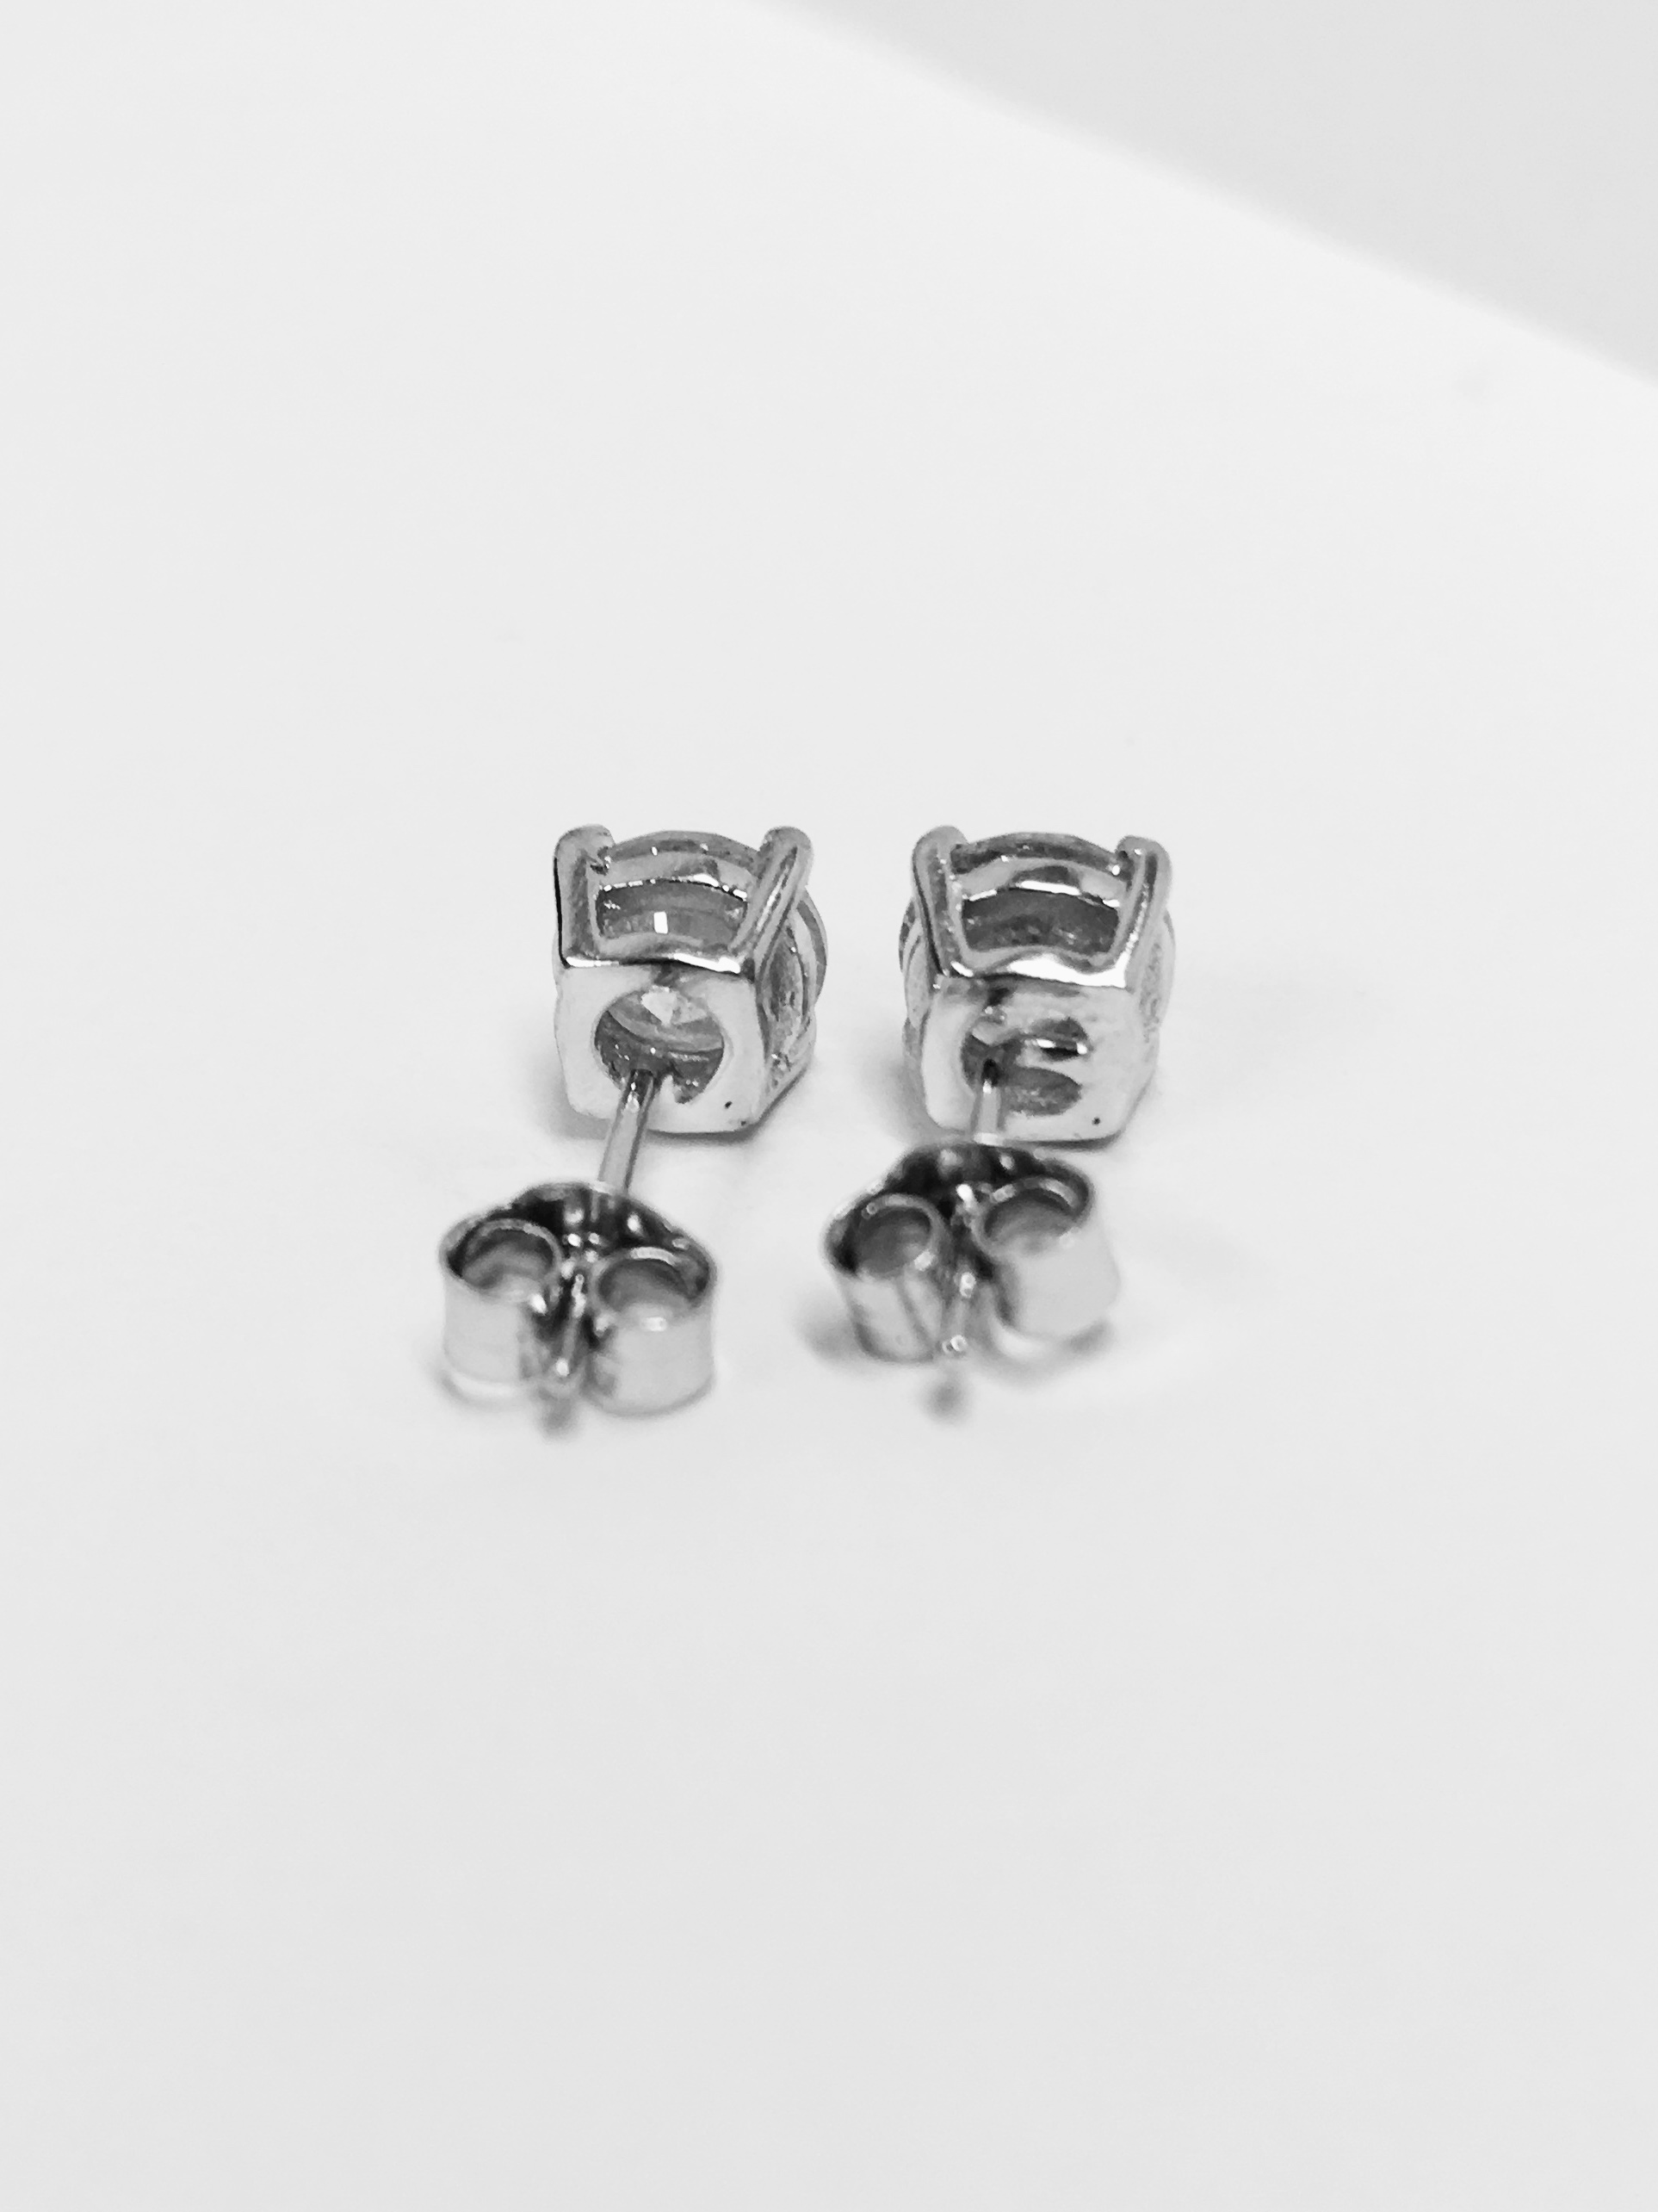 1ct diamond solitaire earrings - Image 22 of 24